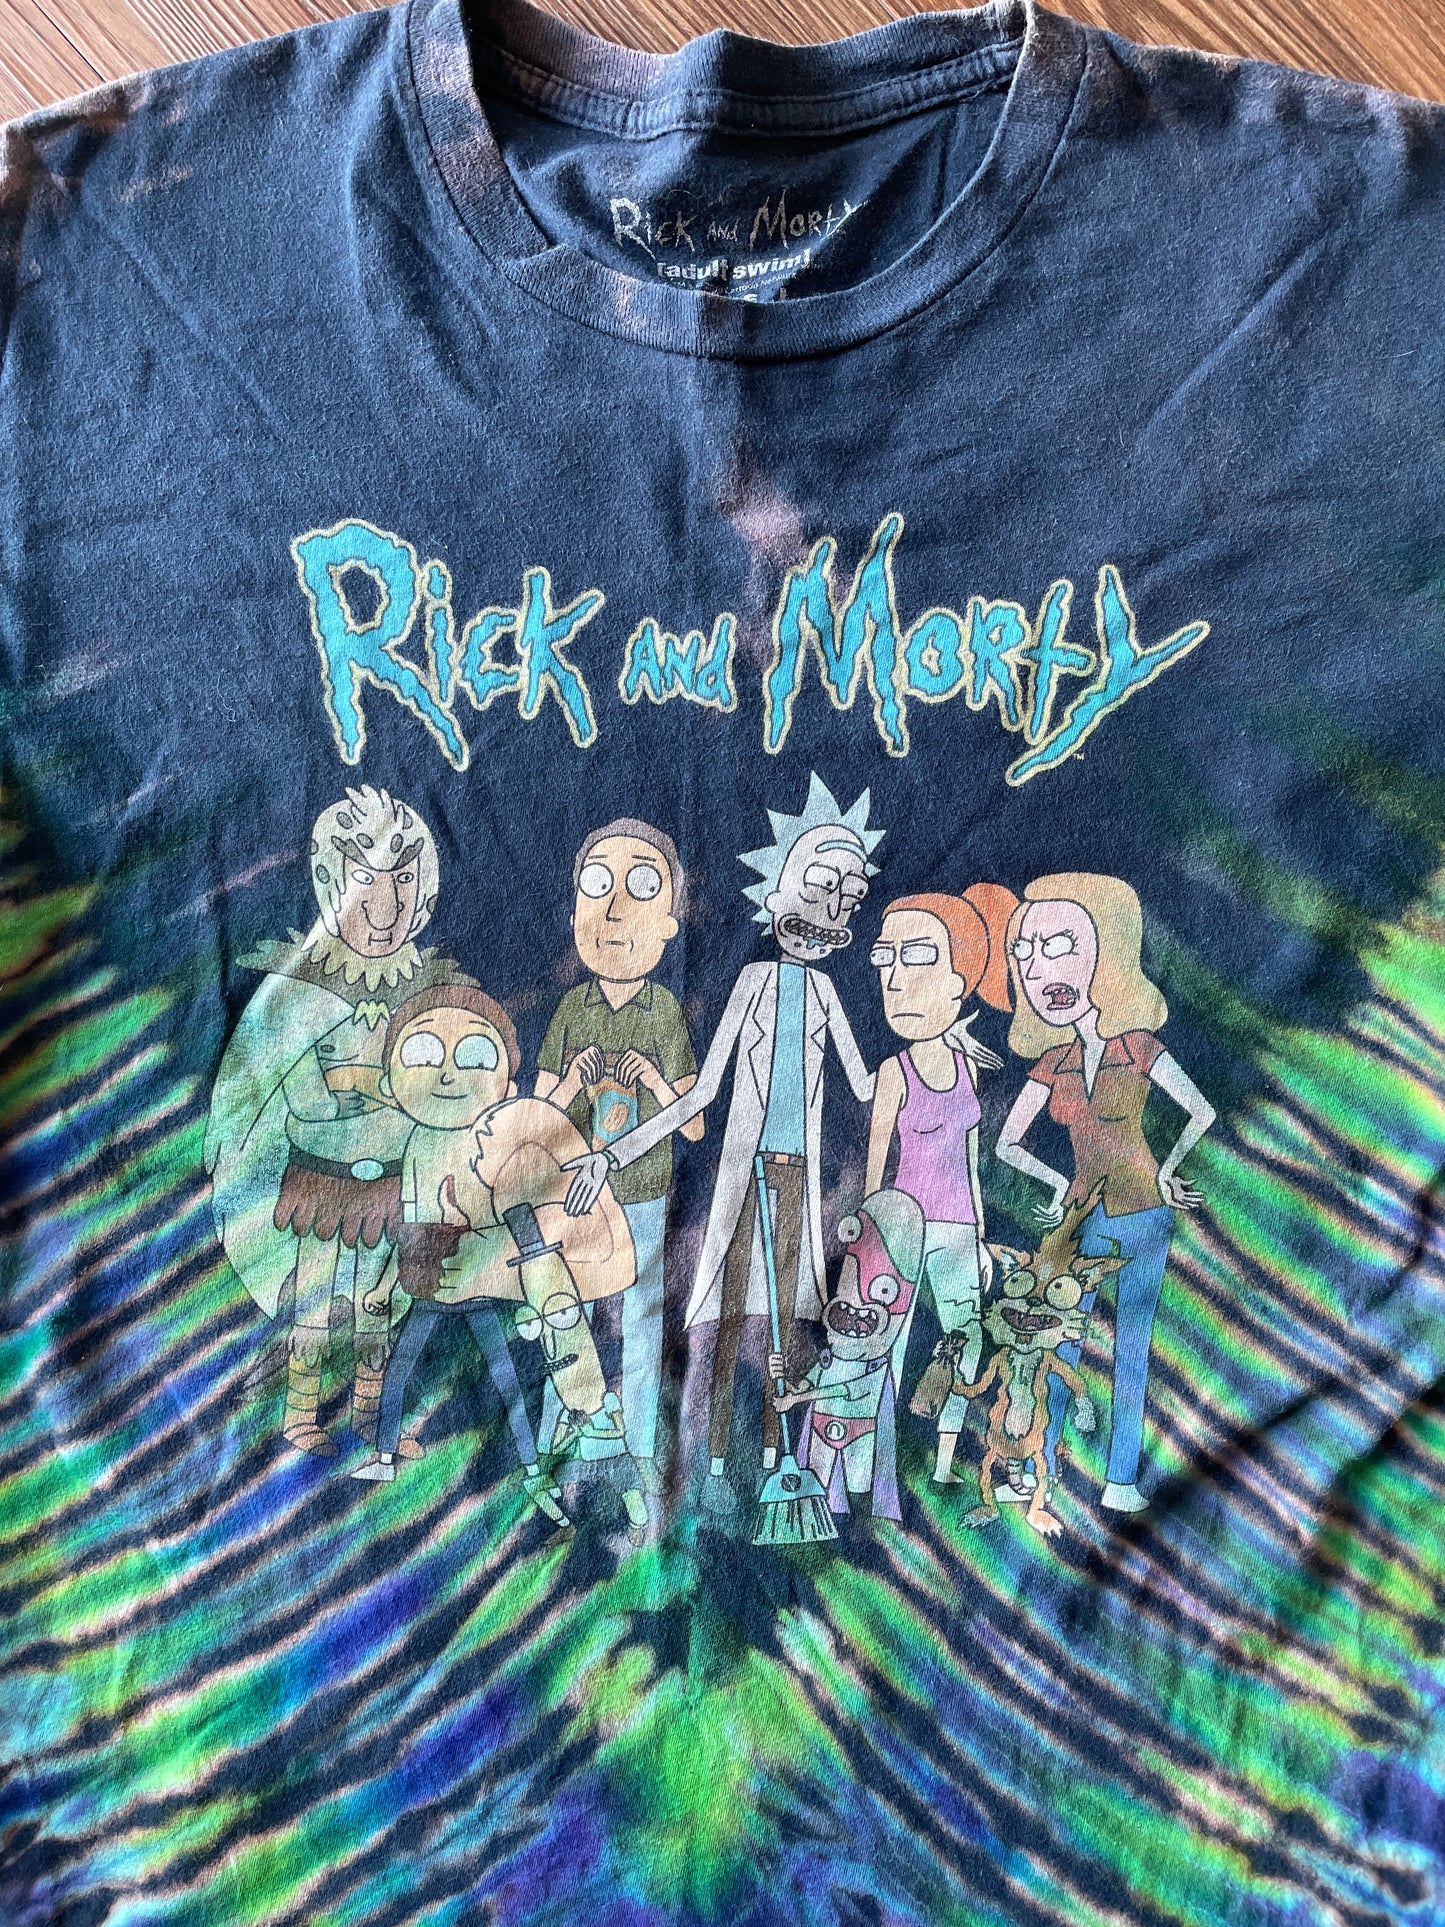 LARGE Men’s Rick and Morty Tie Dye T-Shirt | Adult Swim Characters Reverse Tie Dye Short Sleeve